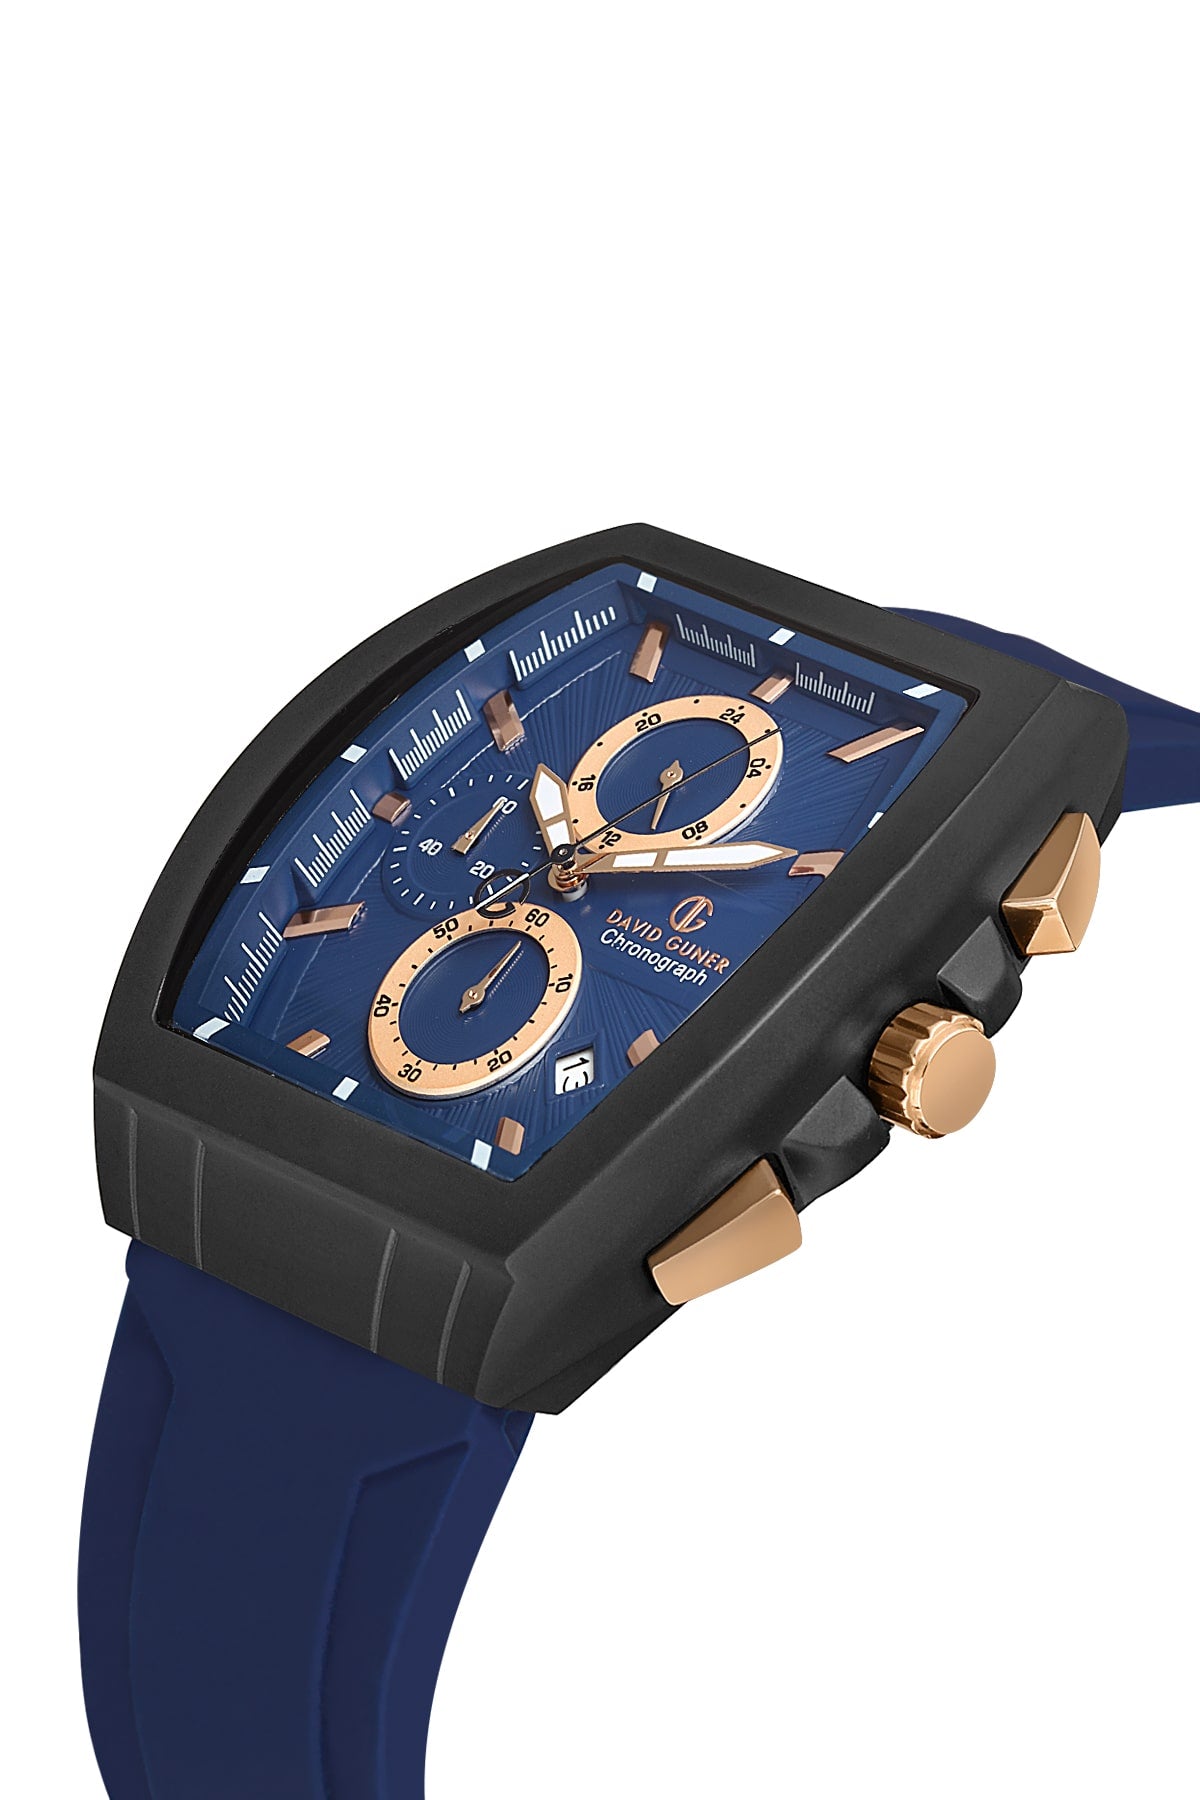 DAVID GUNER Men's Watch with Navy Blue Dial and Navy Blue Silicone Strap